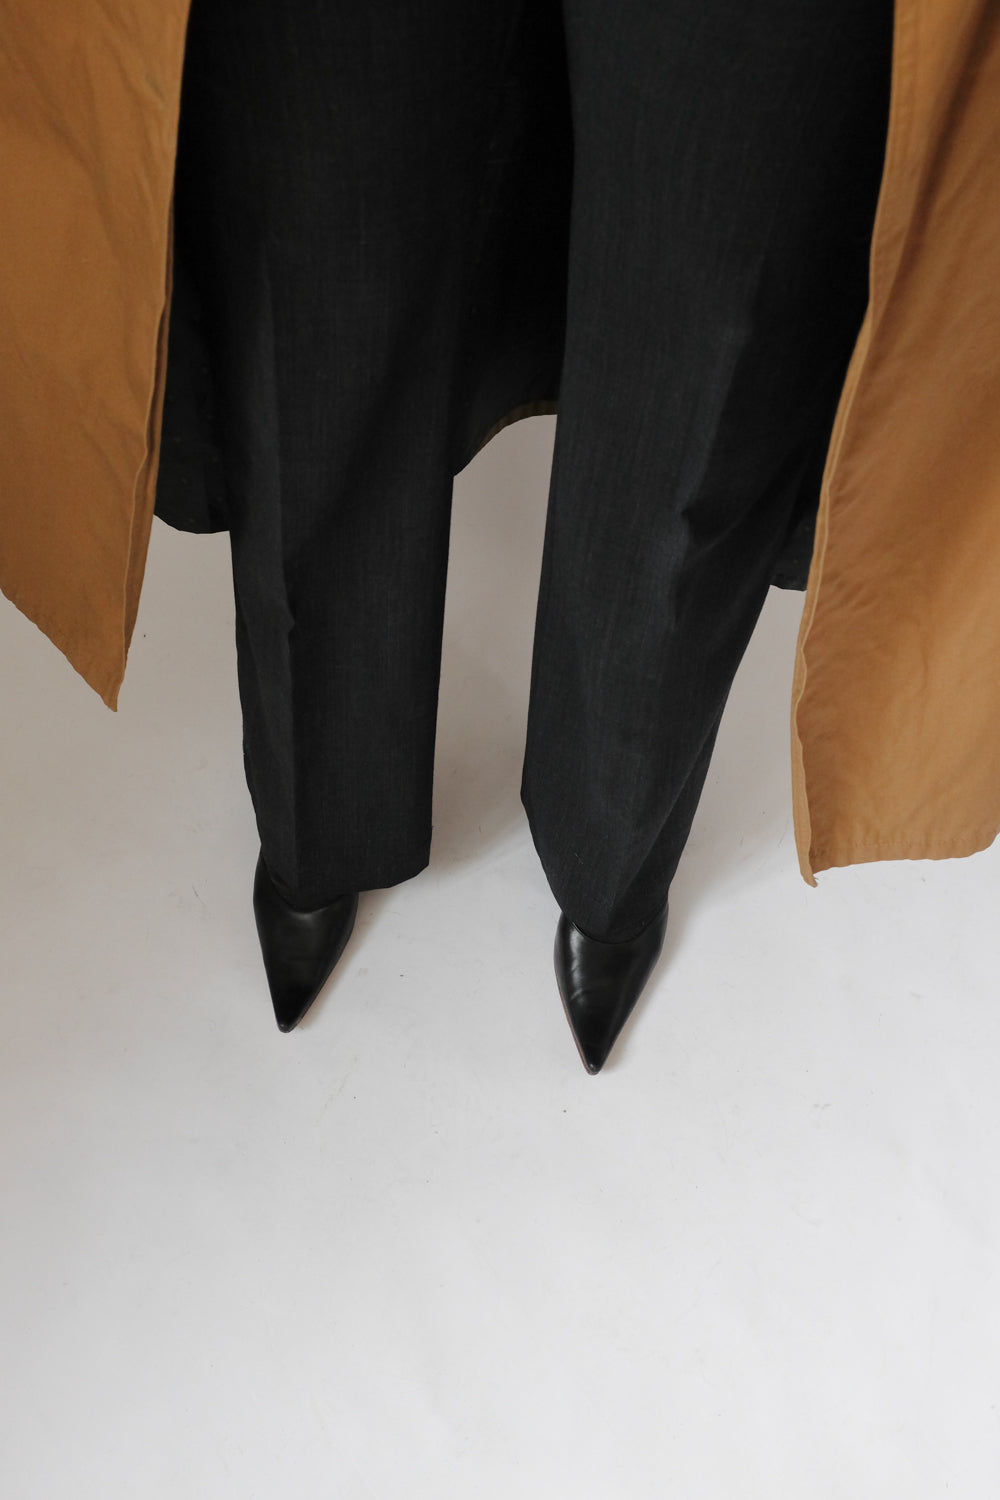 0063_PLEATED WIDE LEG ANTHRACITE WOOL BLEND PANTS